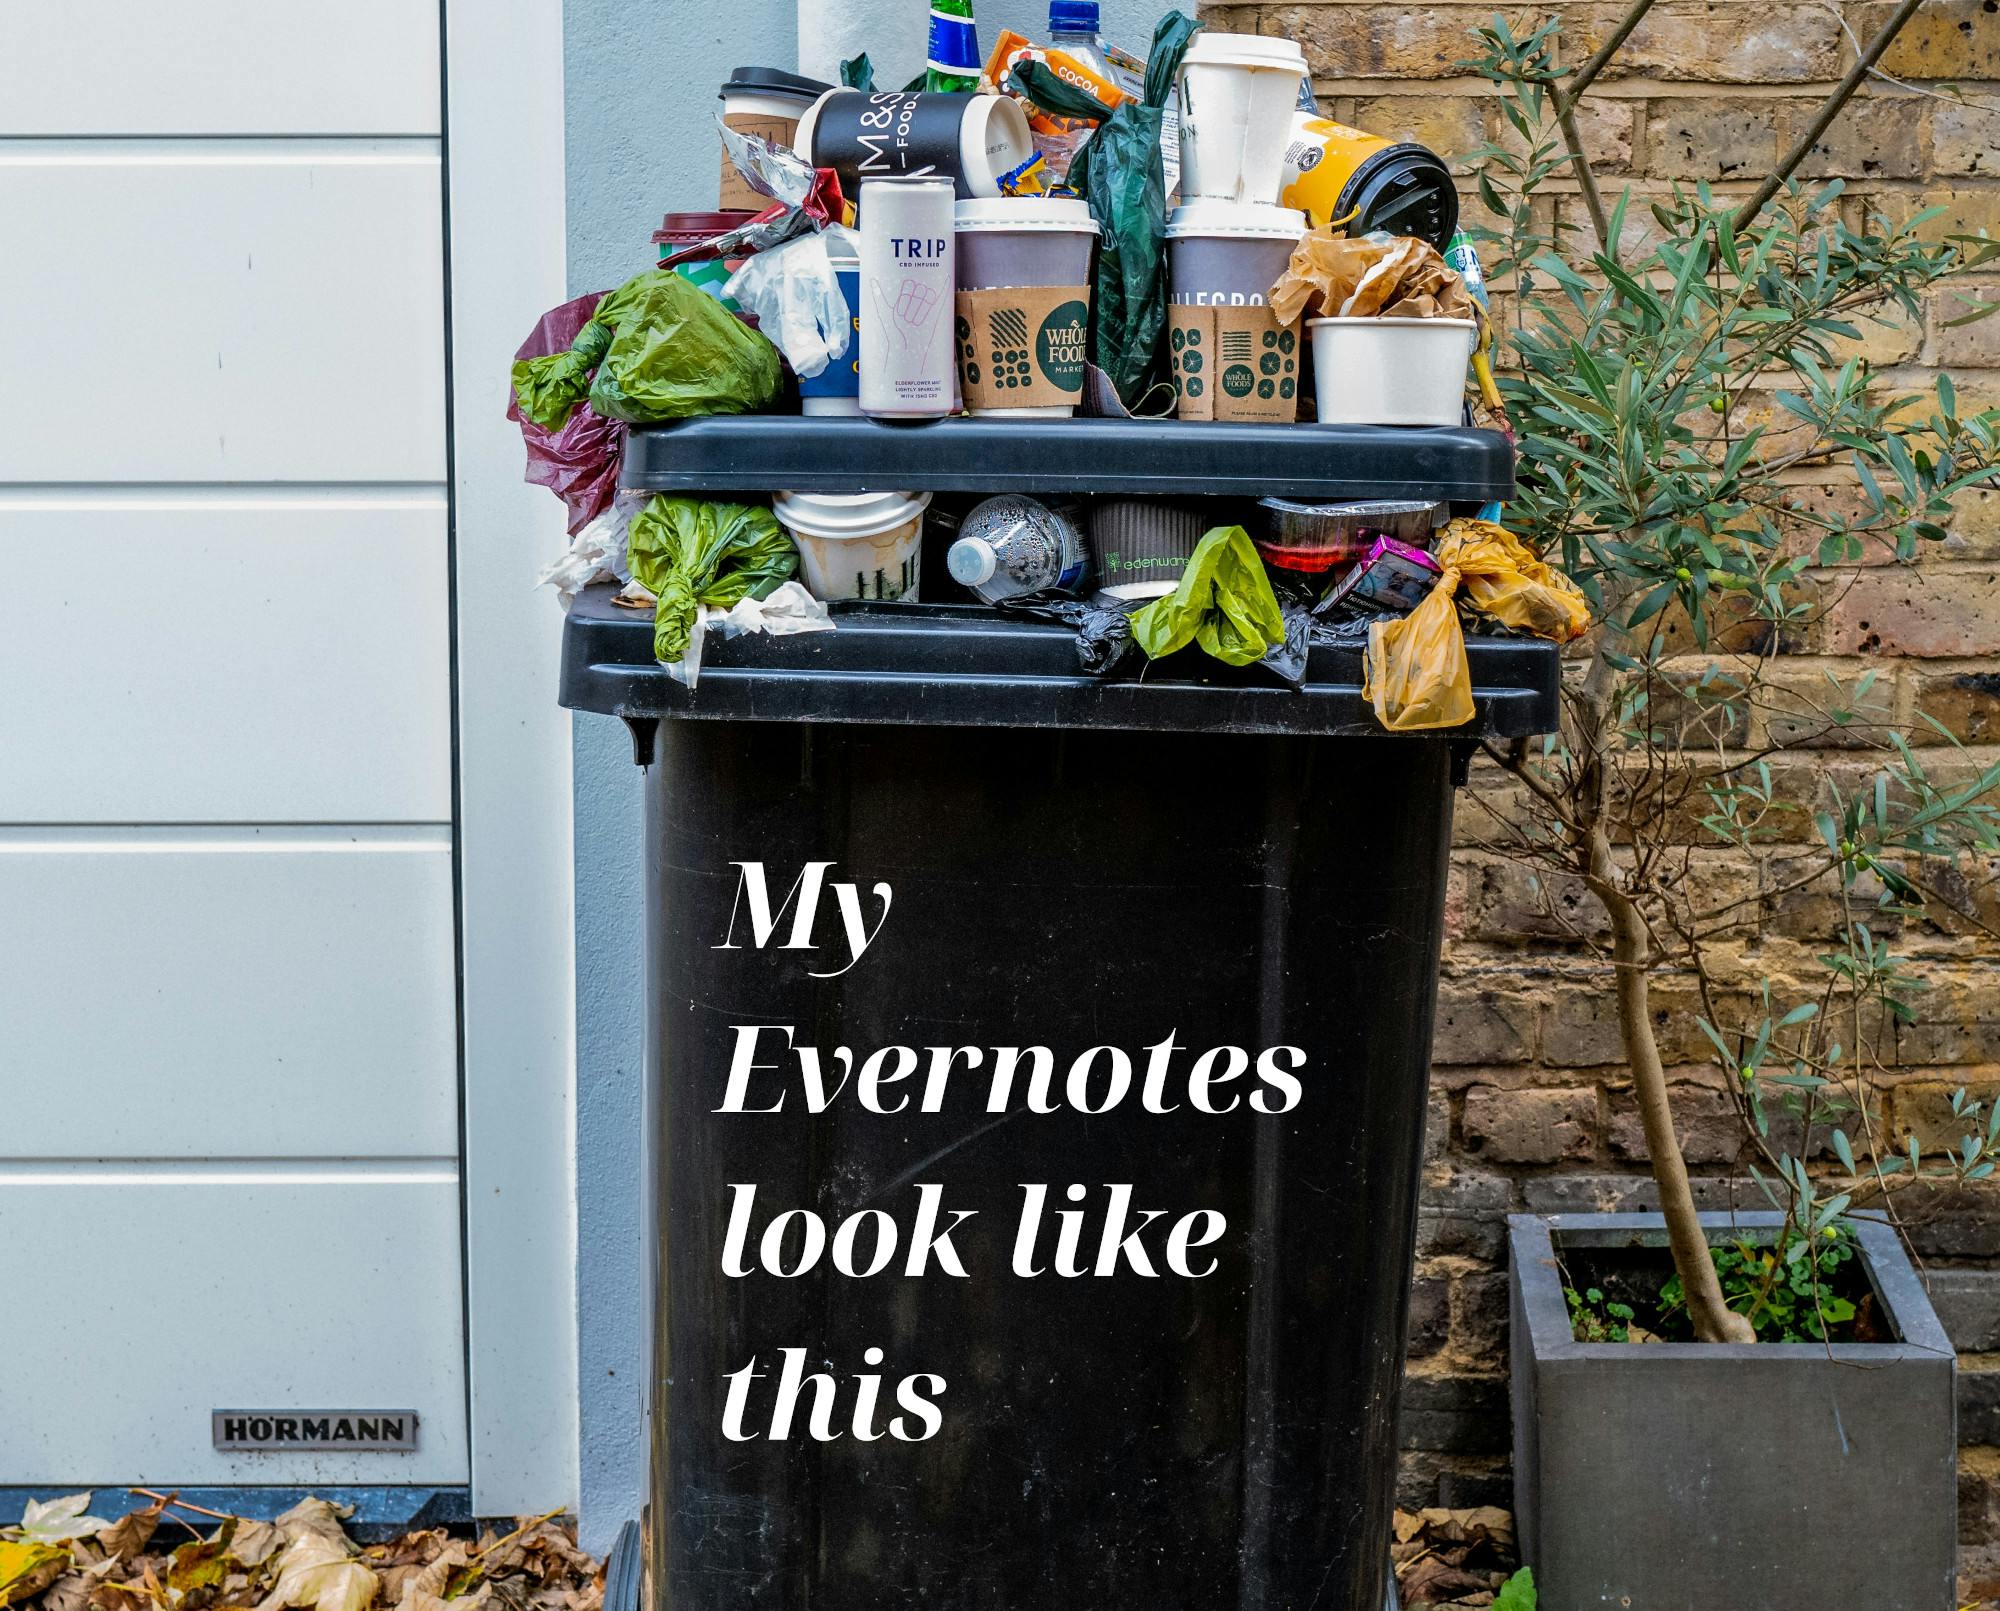 An image of a trashcan, with the caption "My evernotes look like this".